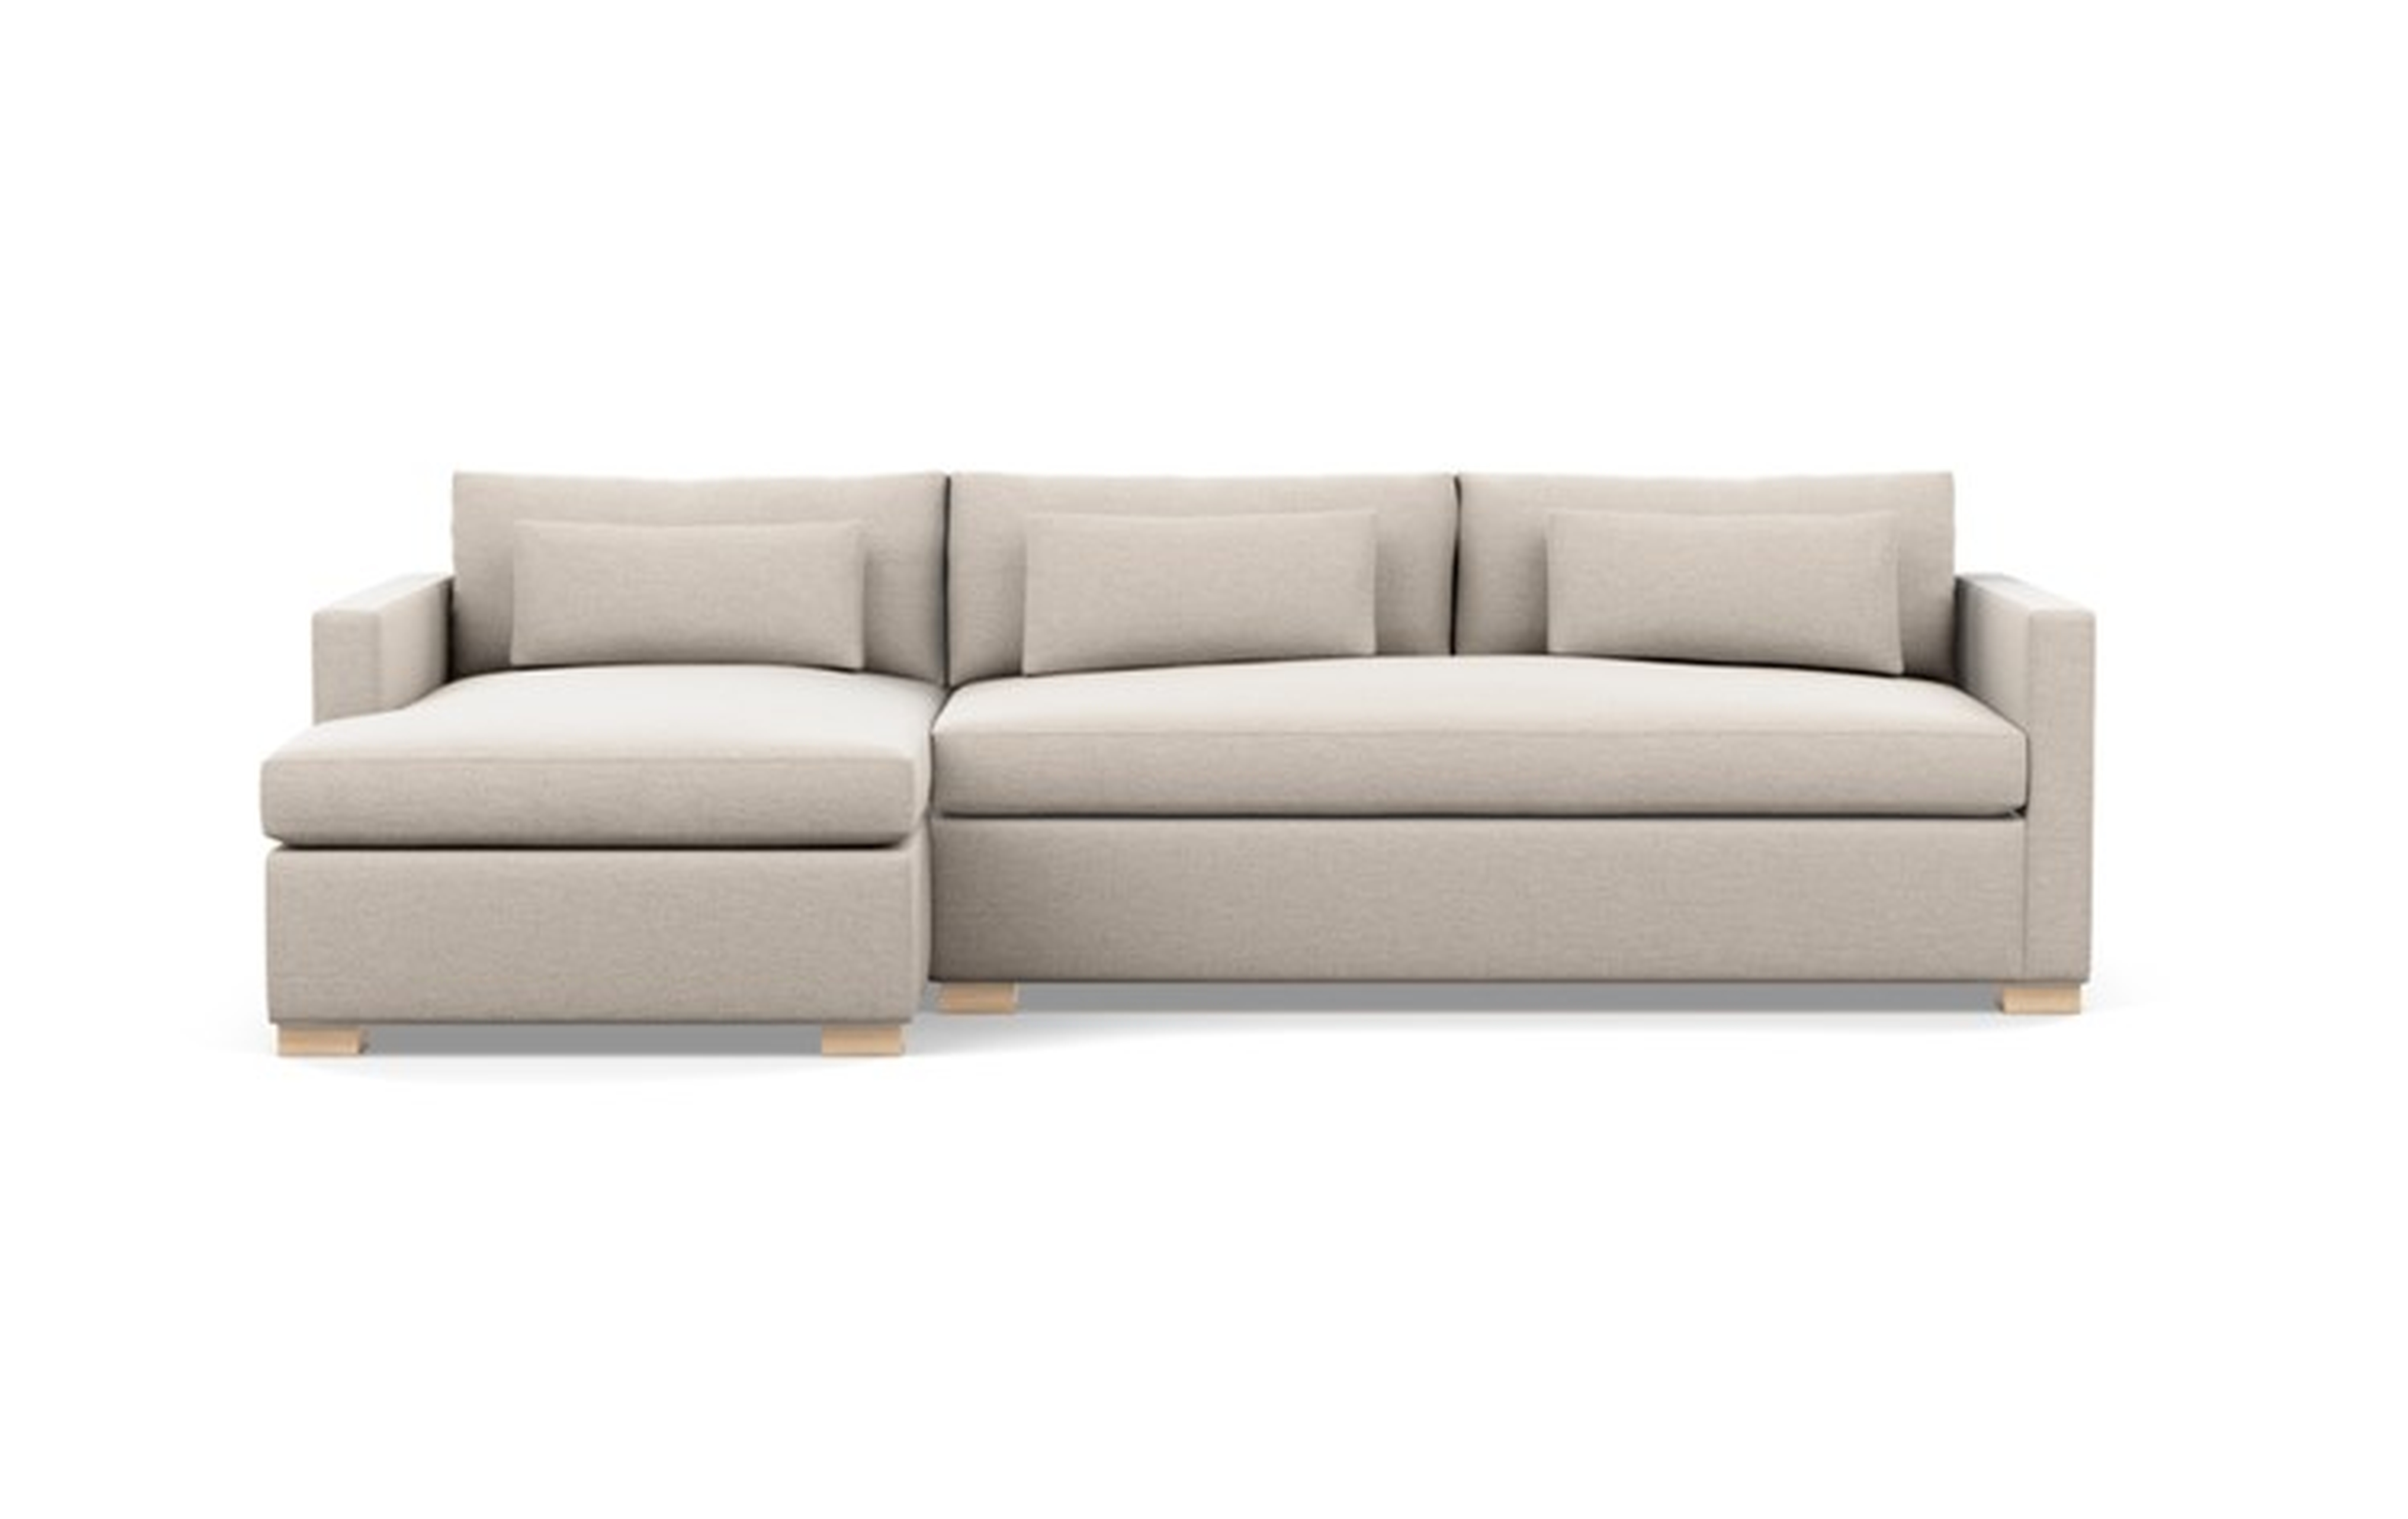 CHARLY SLEEPER-Sleeper Sectional Sofa with Left 73" Chaise - Interior Define